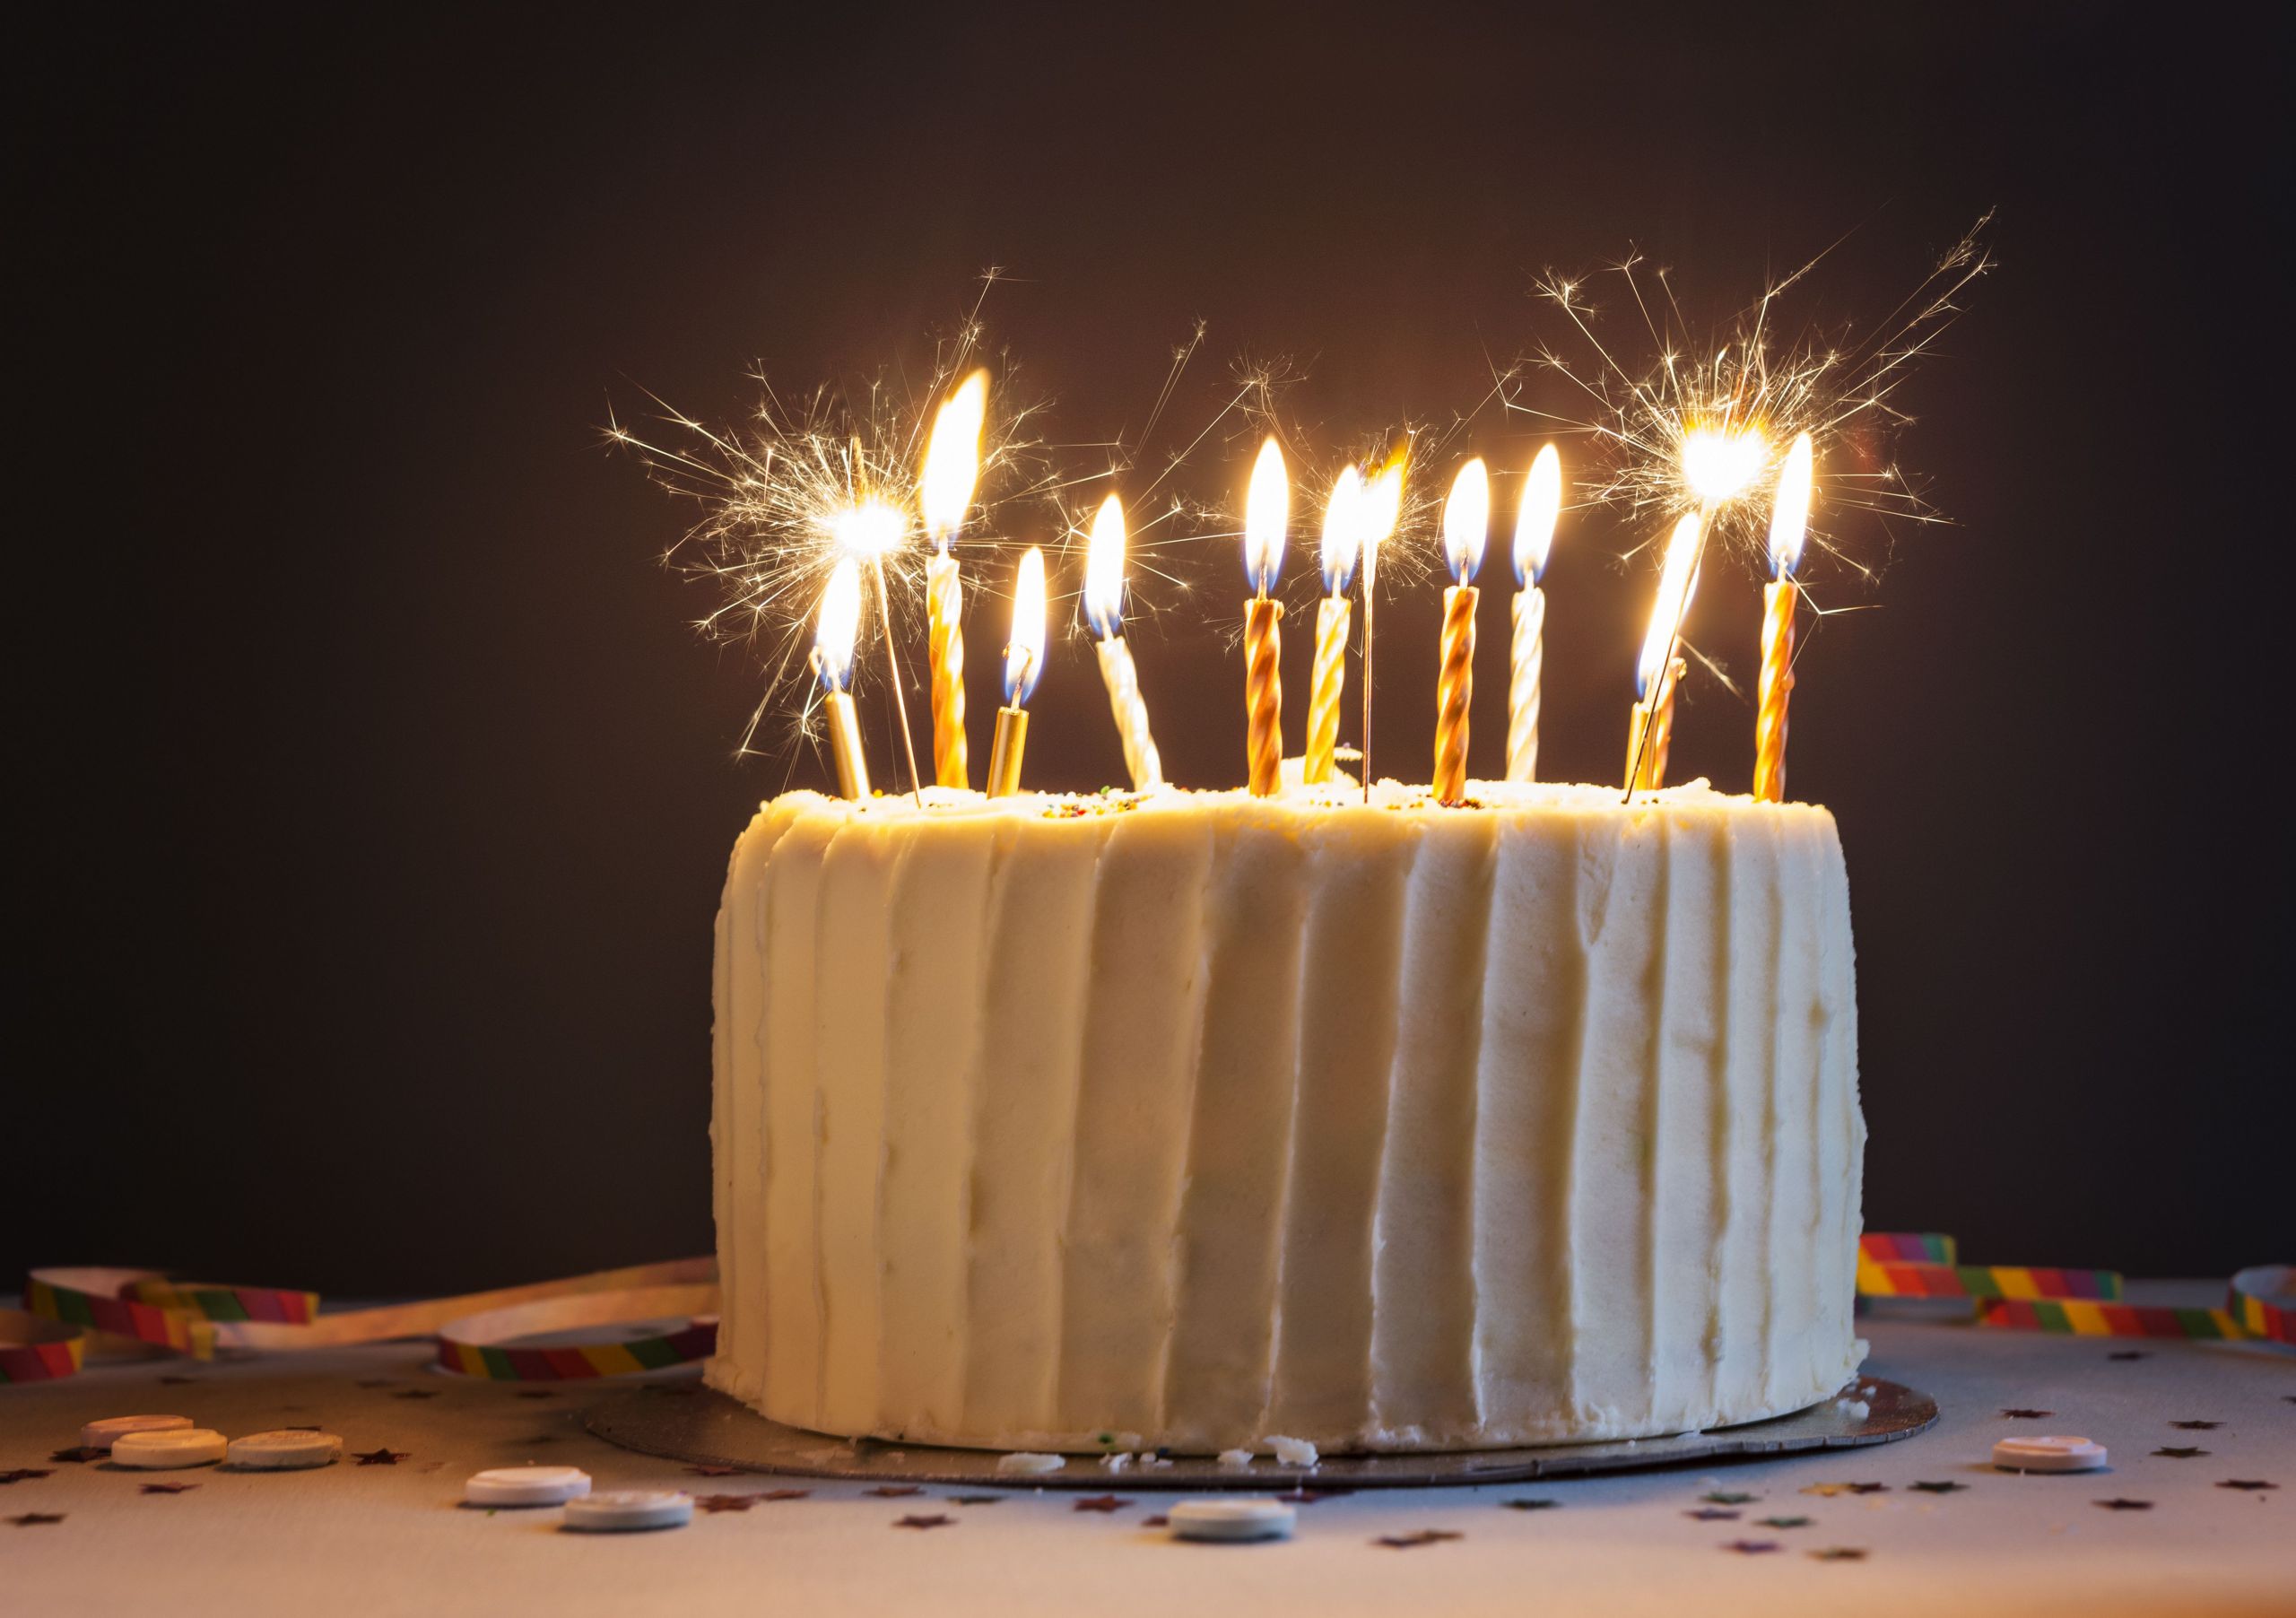 Birthday Cake Candle
 Are Sparklers Safe on Cakes